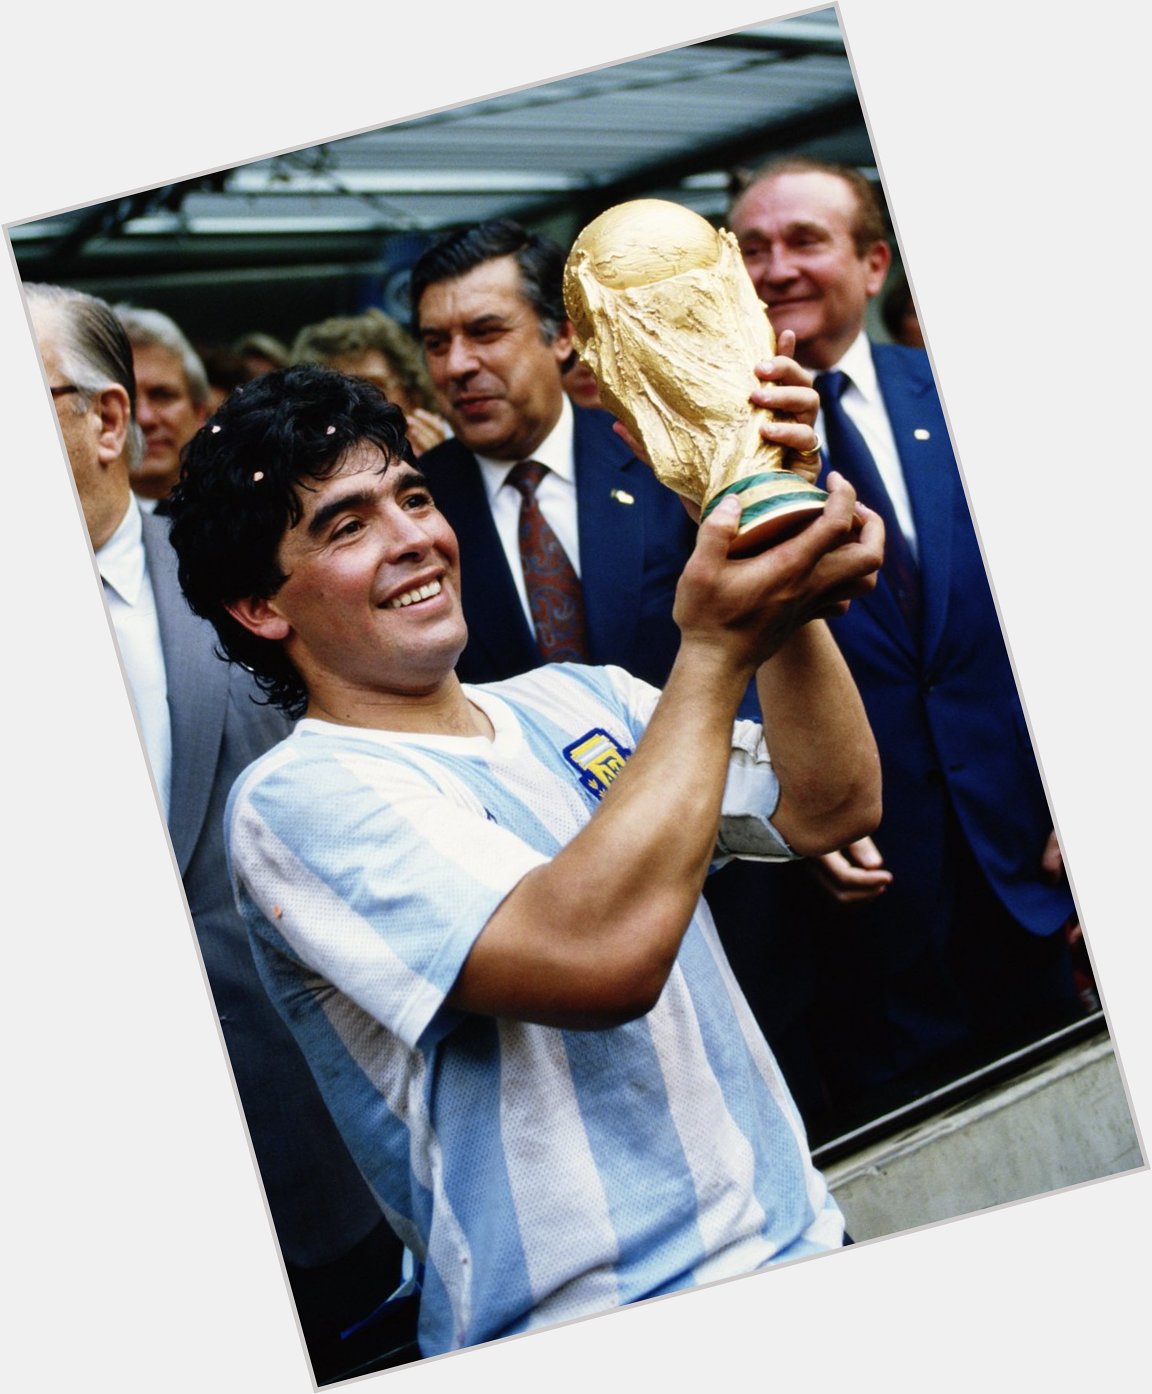 Happy birthday Diego Maradona. An absolute genius with the ball at his feet!  

Is he the greatest of all time? 